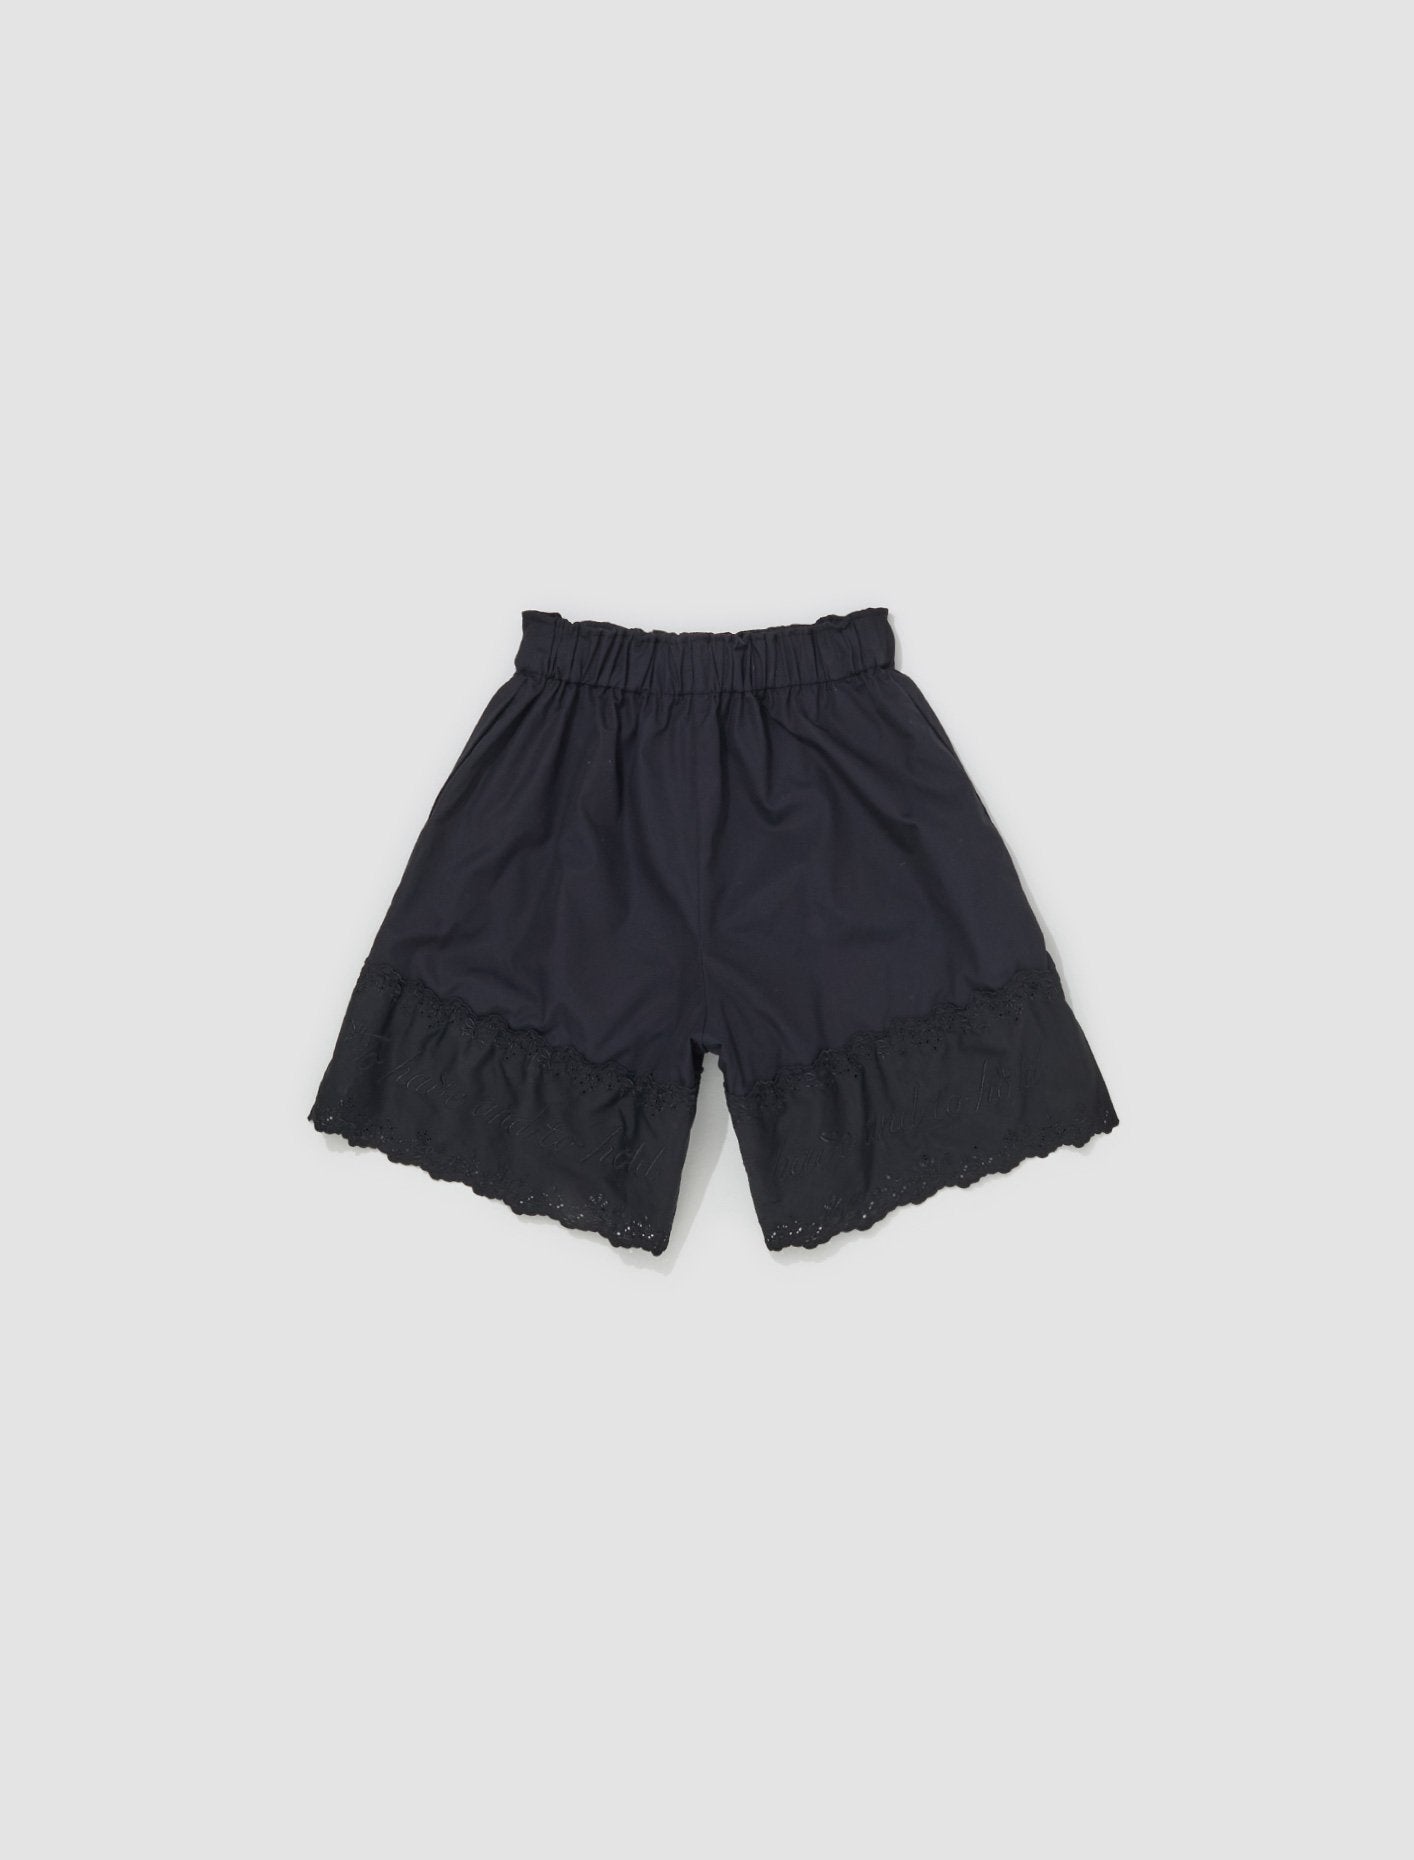 Easy Drawstring Shorts with Trim in Black